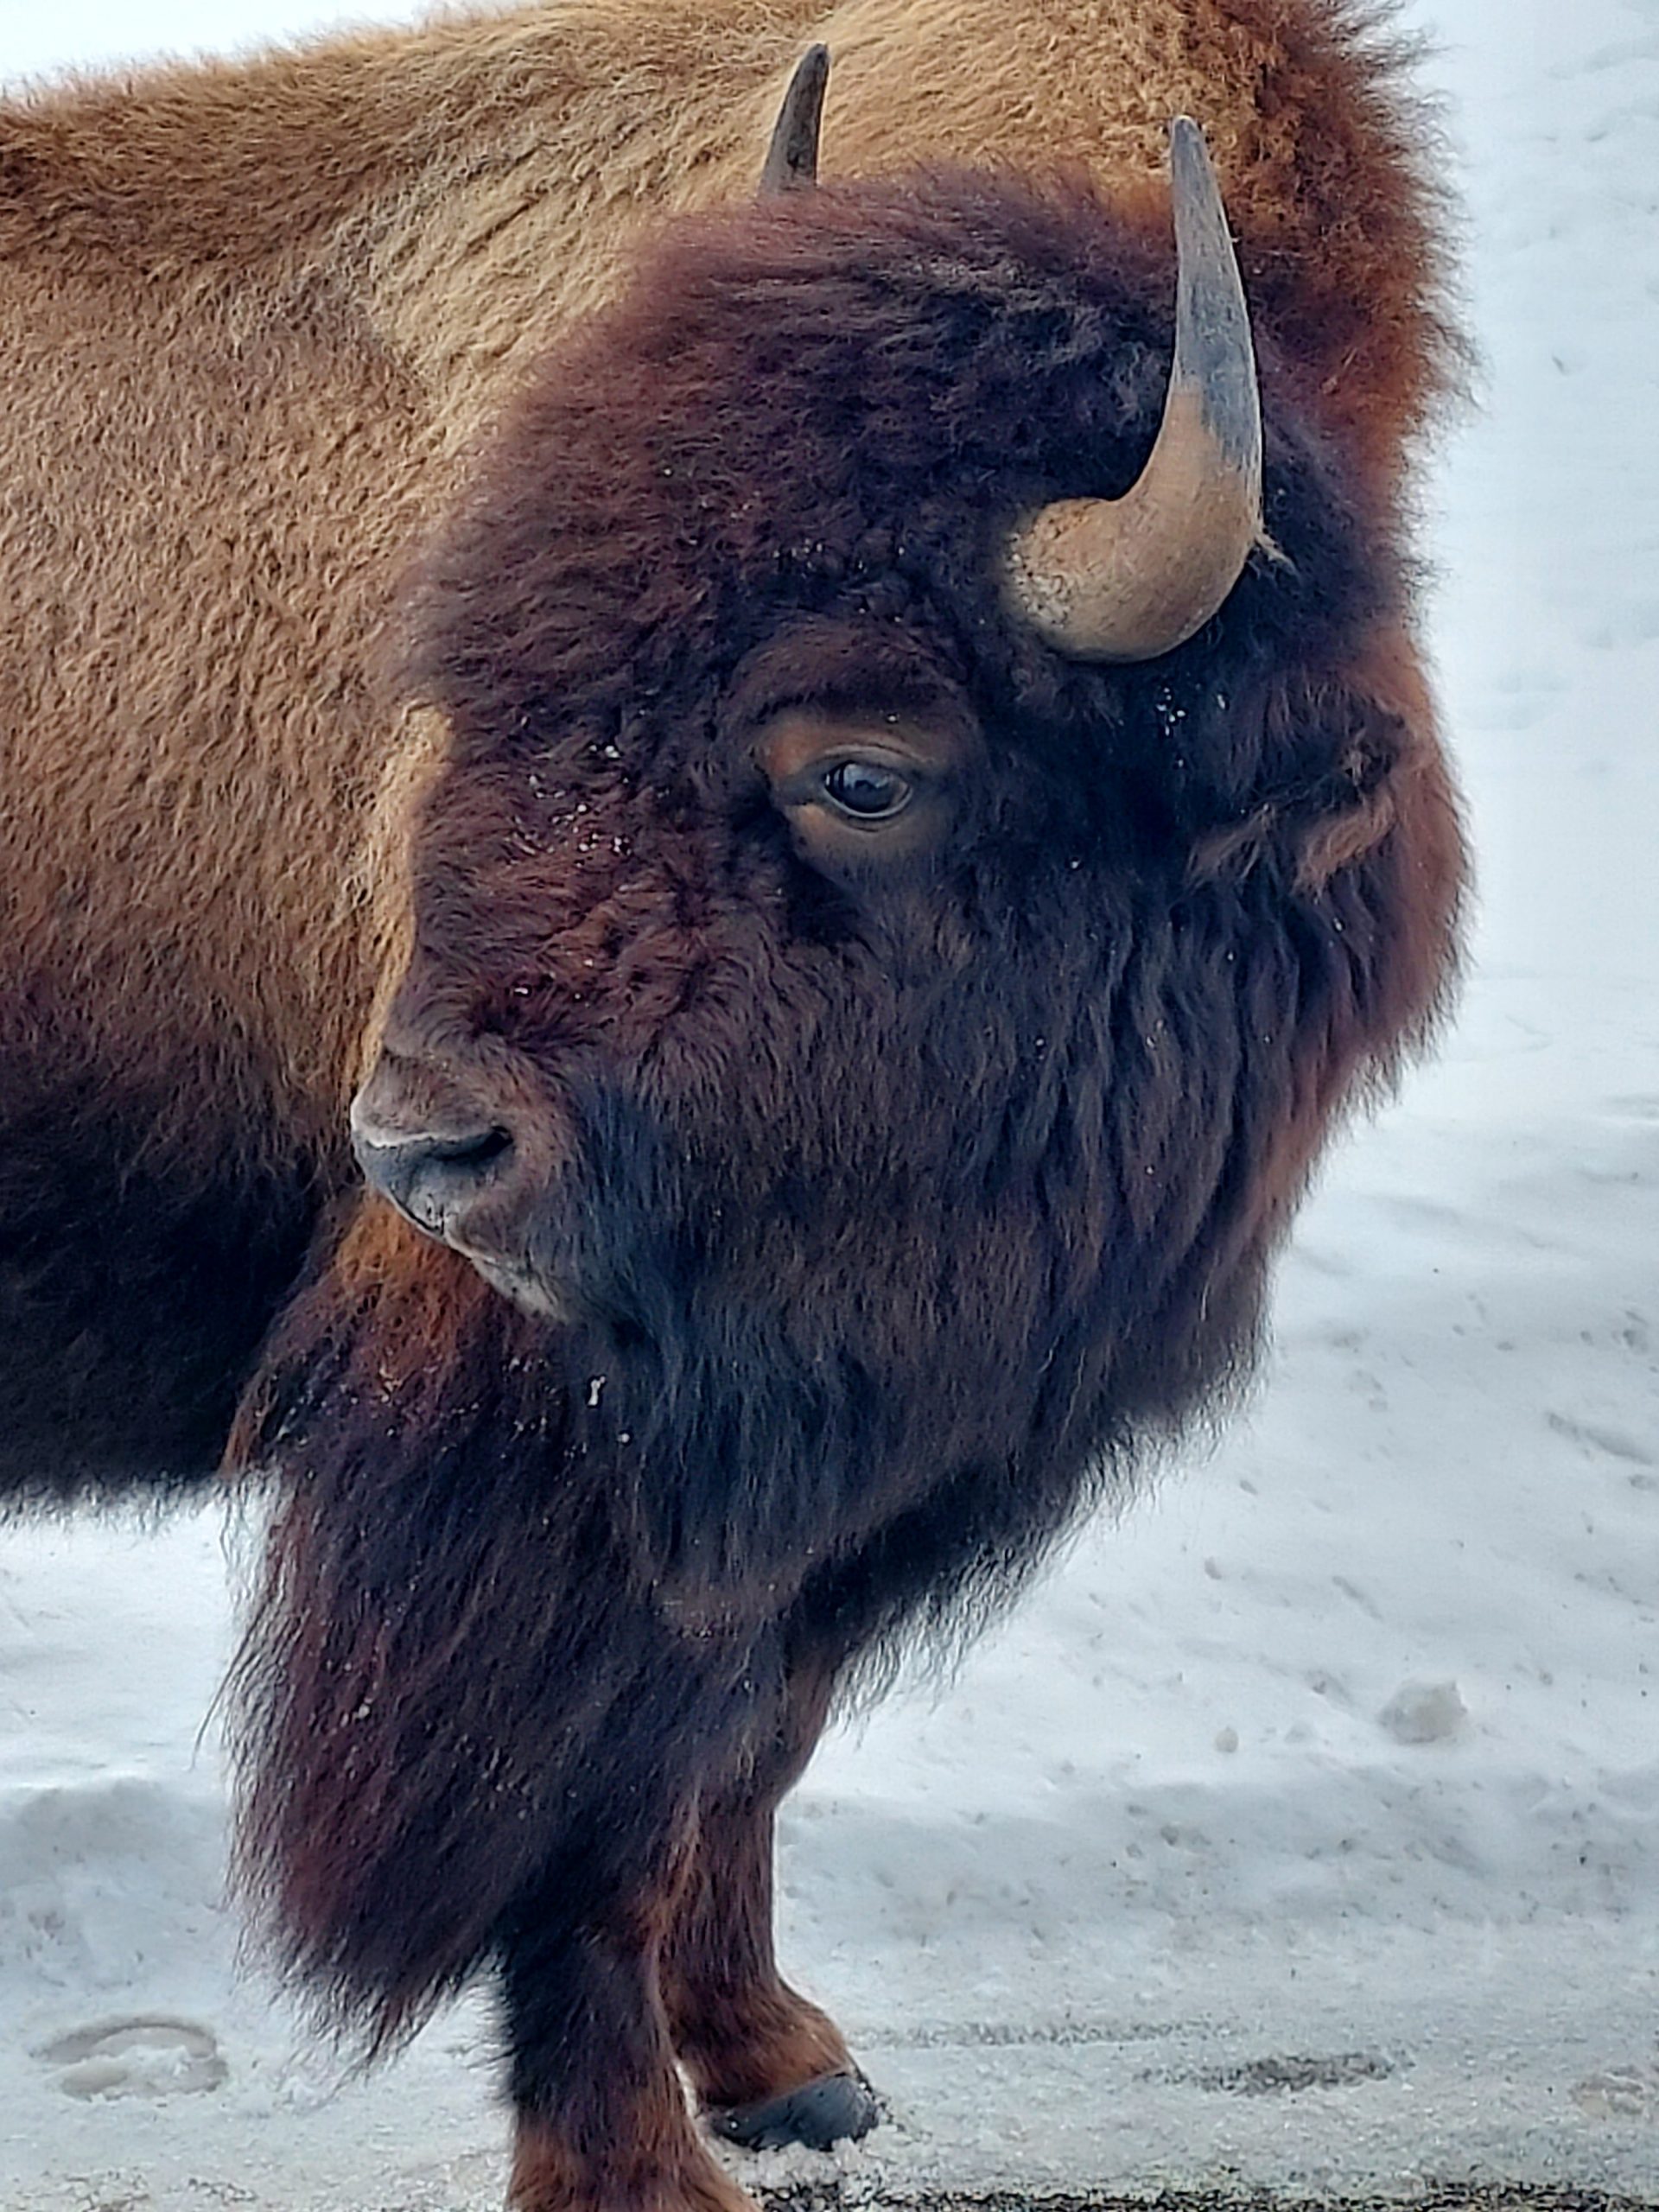 Yellowstone bison are a globally unique animal. Harsh winters can drive bison out of the park where they are often killed. (Photo: George Wuerthner)